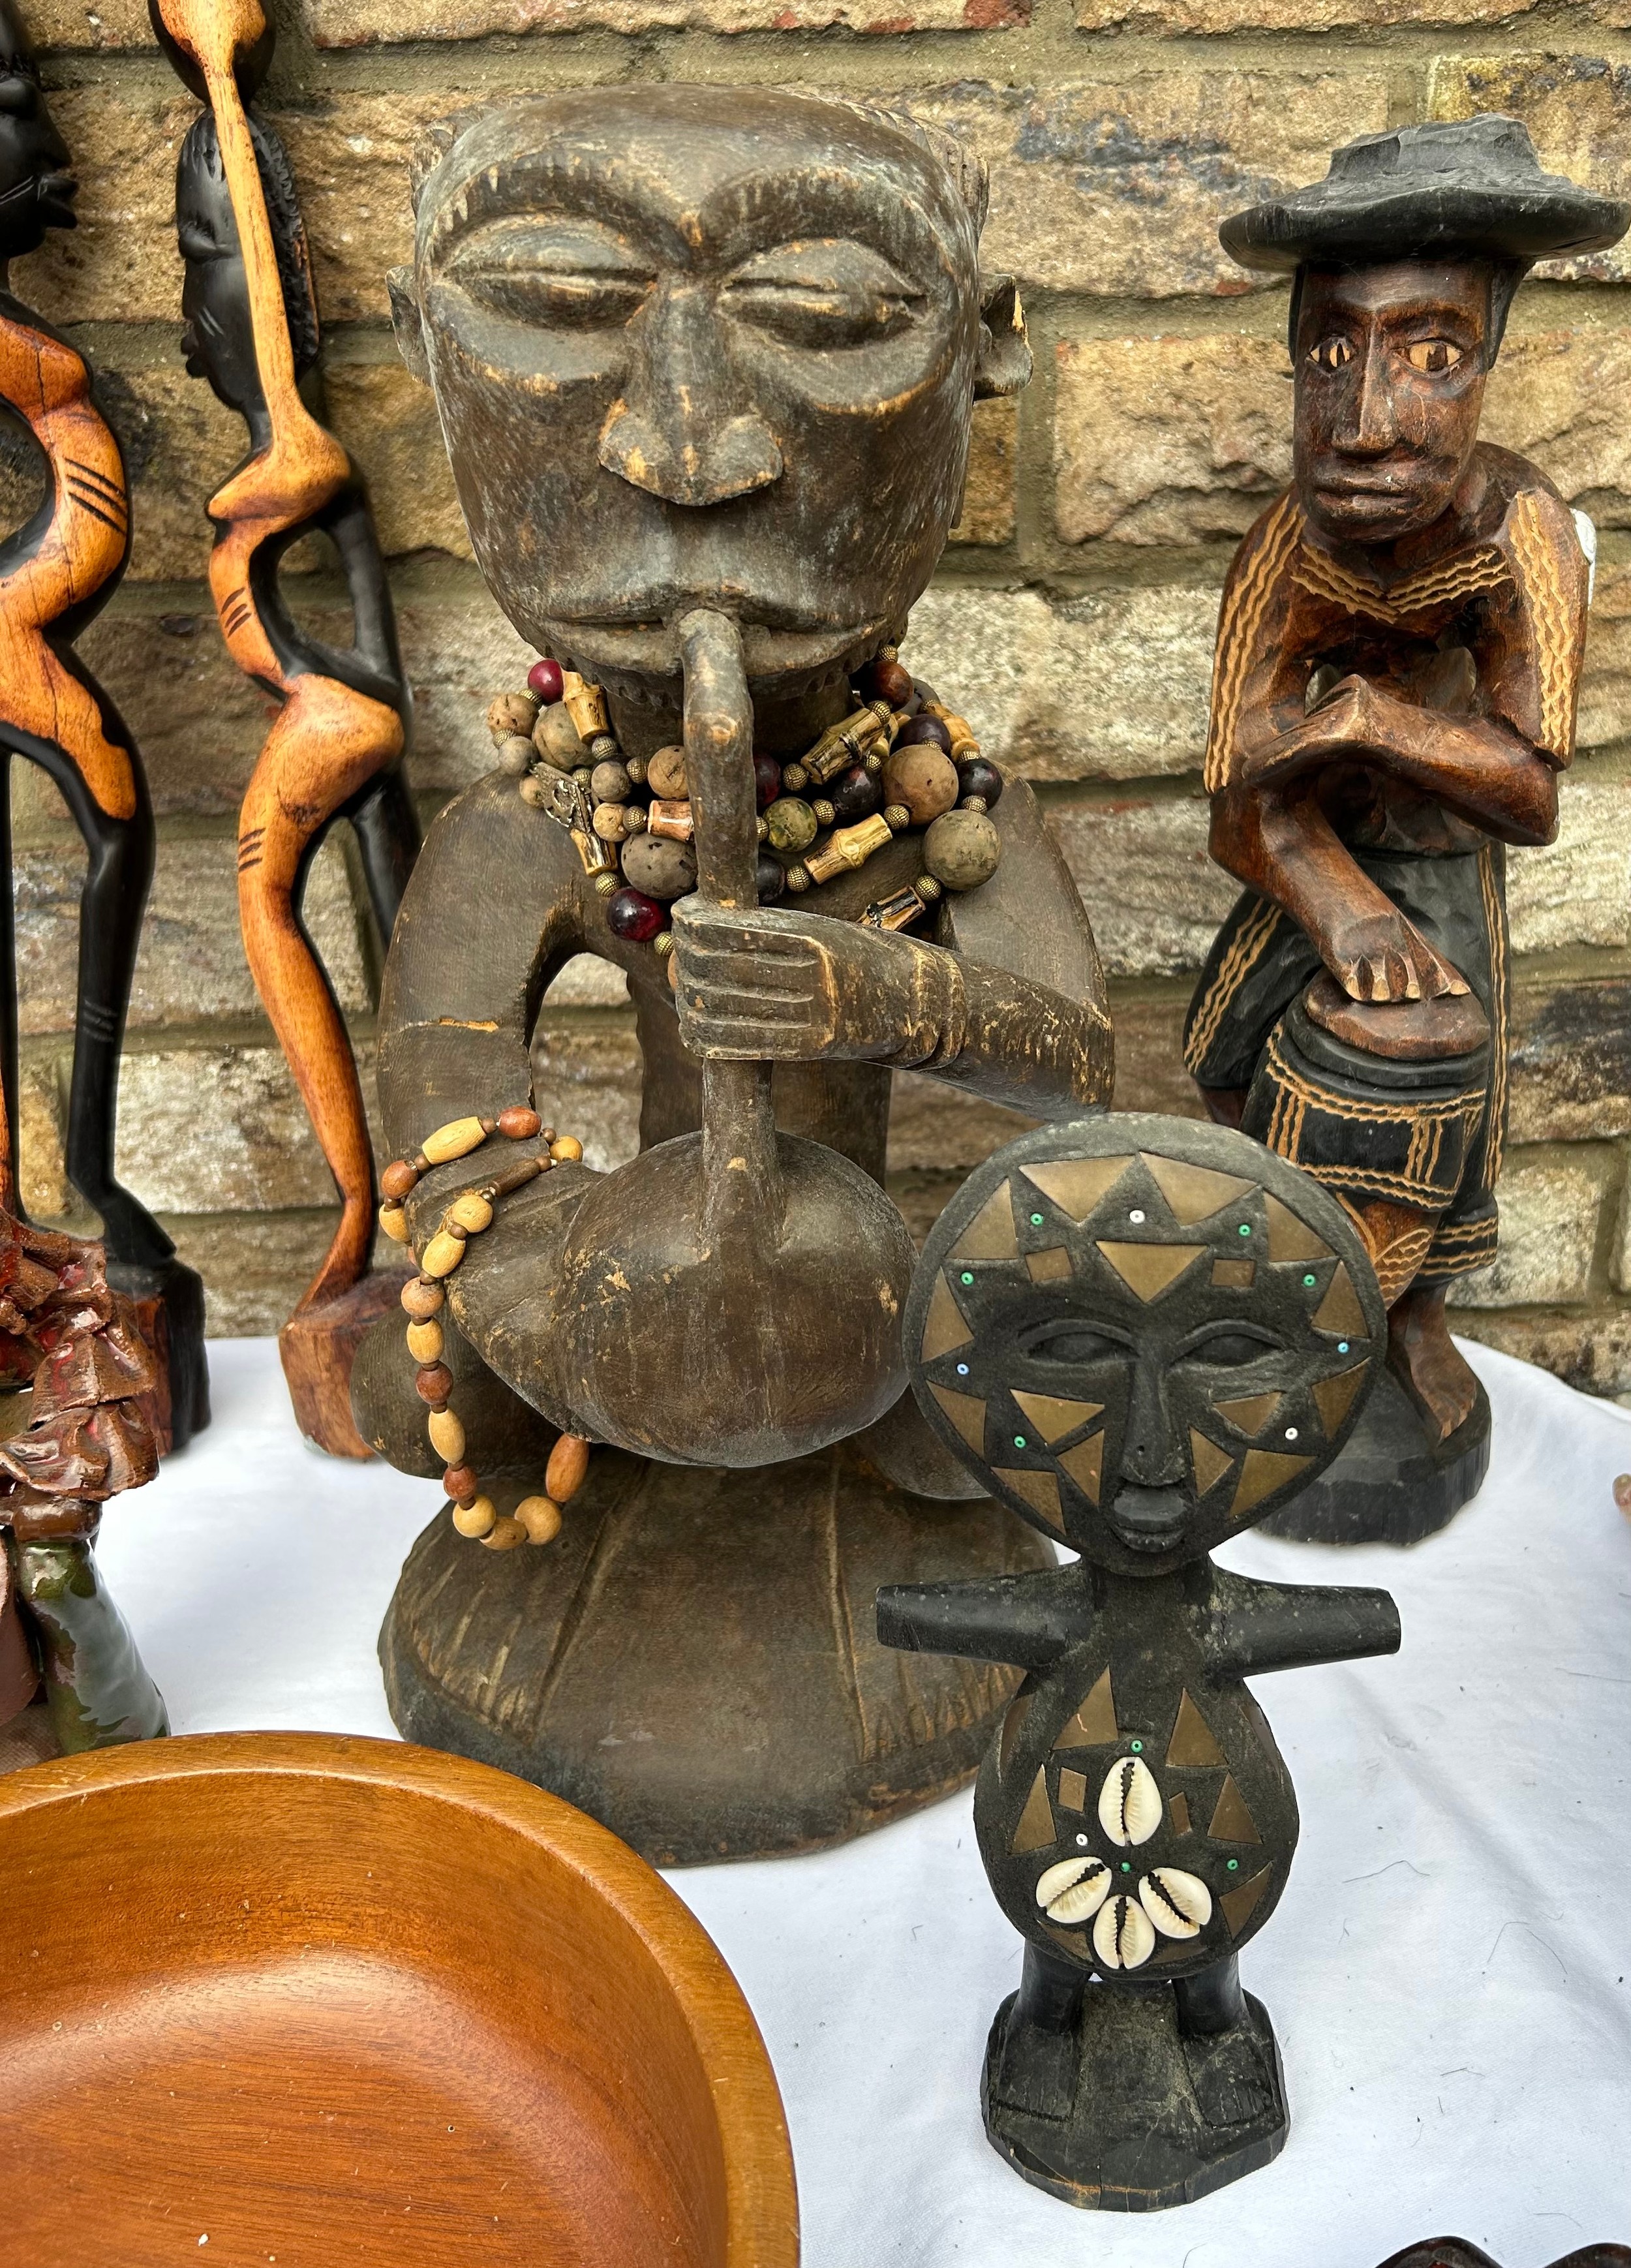 An unusual lot of tribal wooden items to include a wooden painted boar, wooden figures and mask wall - Bild 4 aus 5